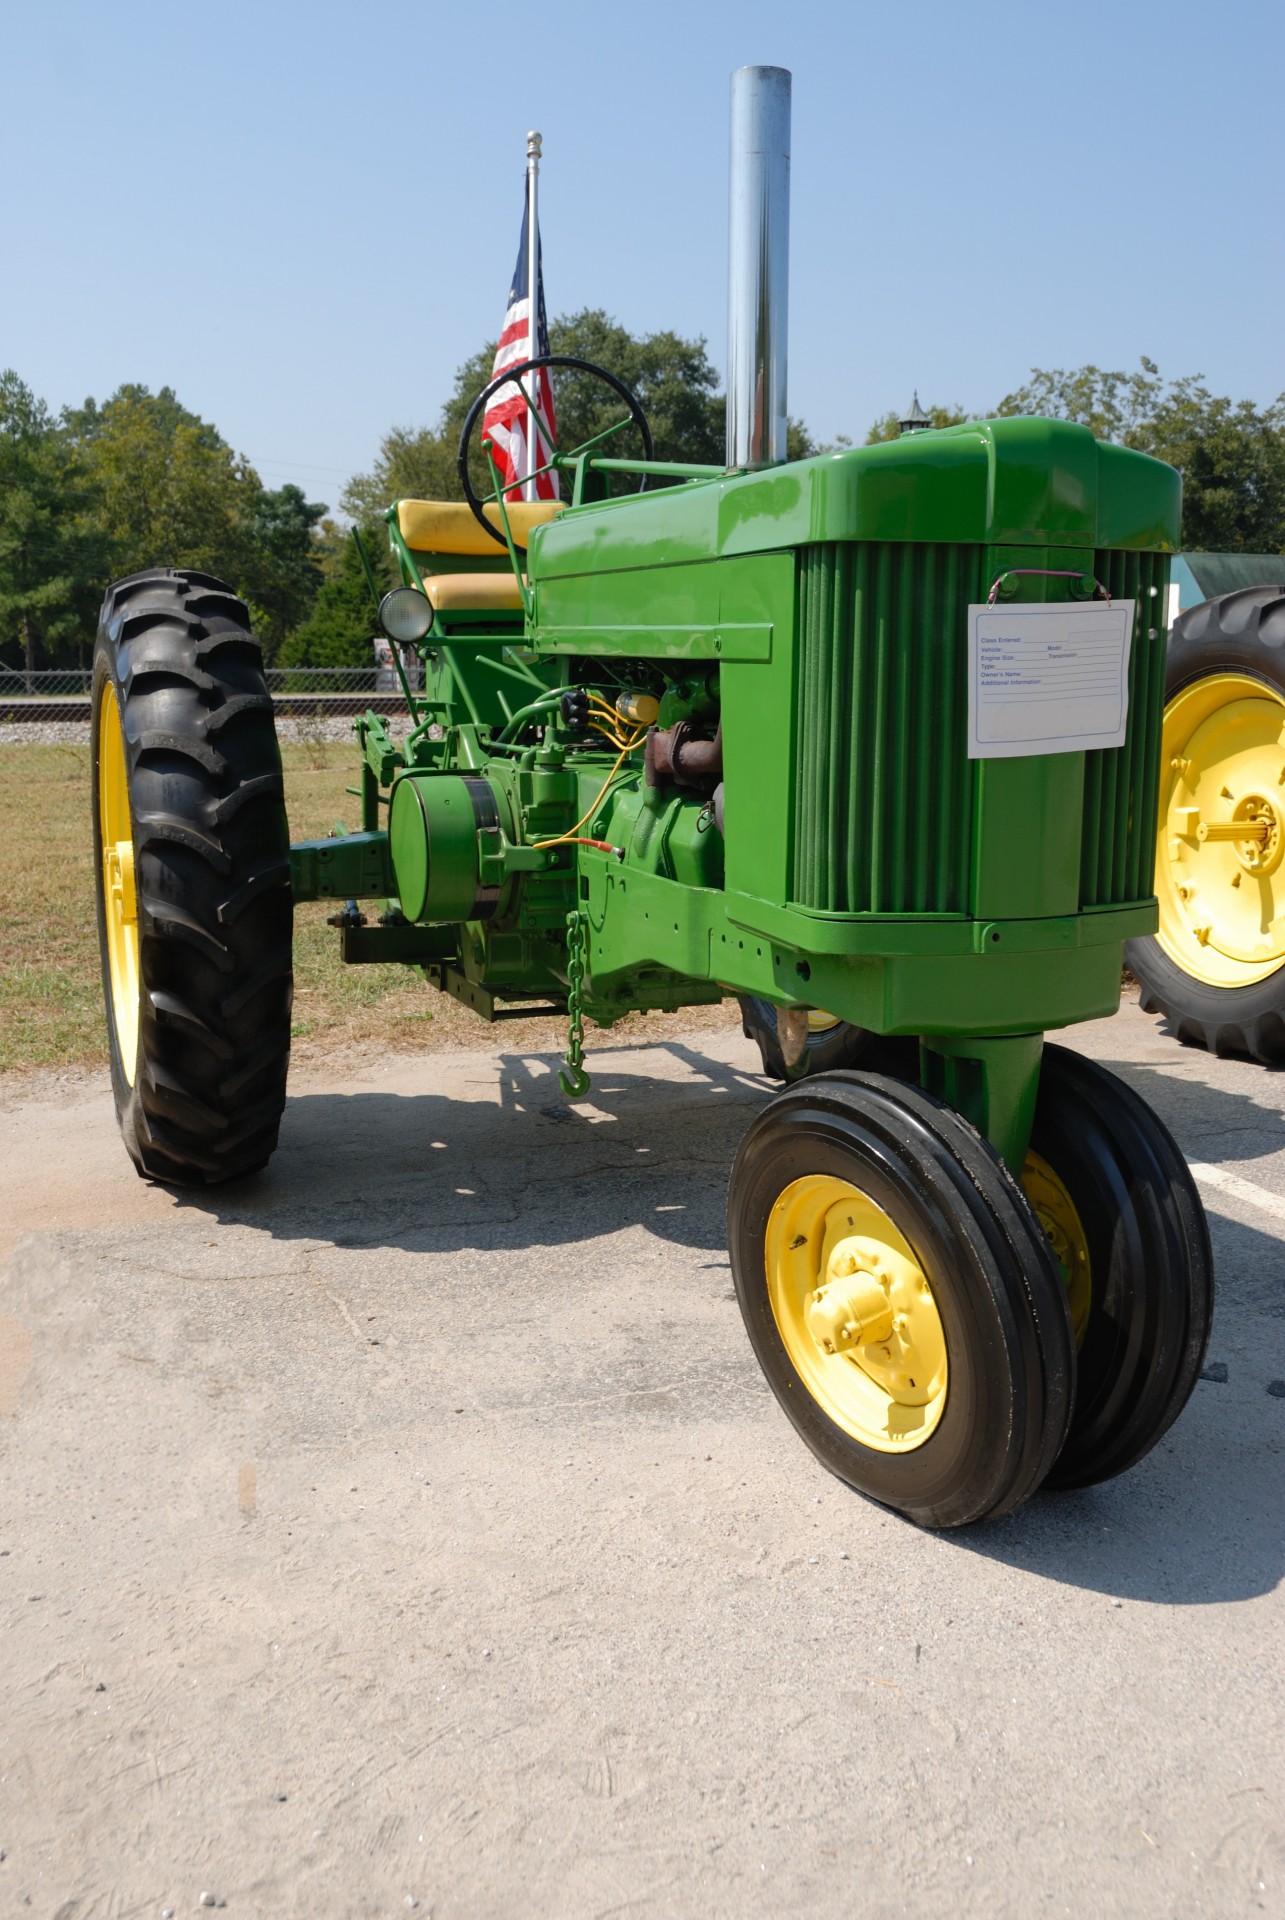 Vintage green tractor at show in Georgia, USA